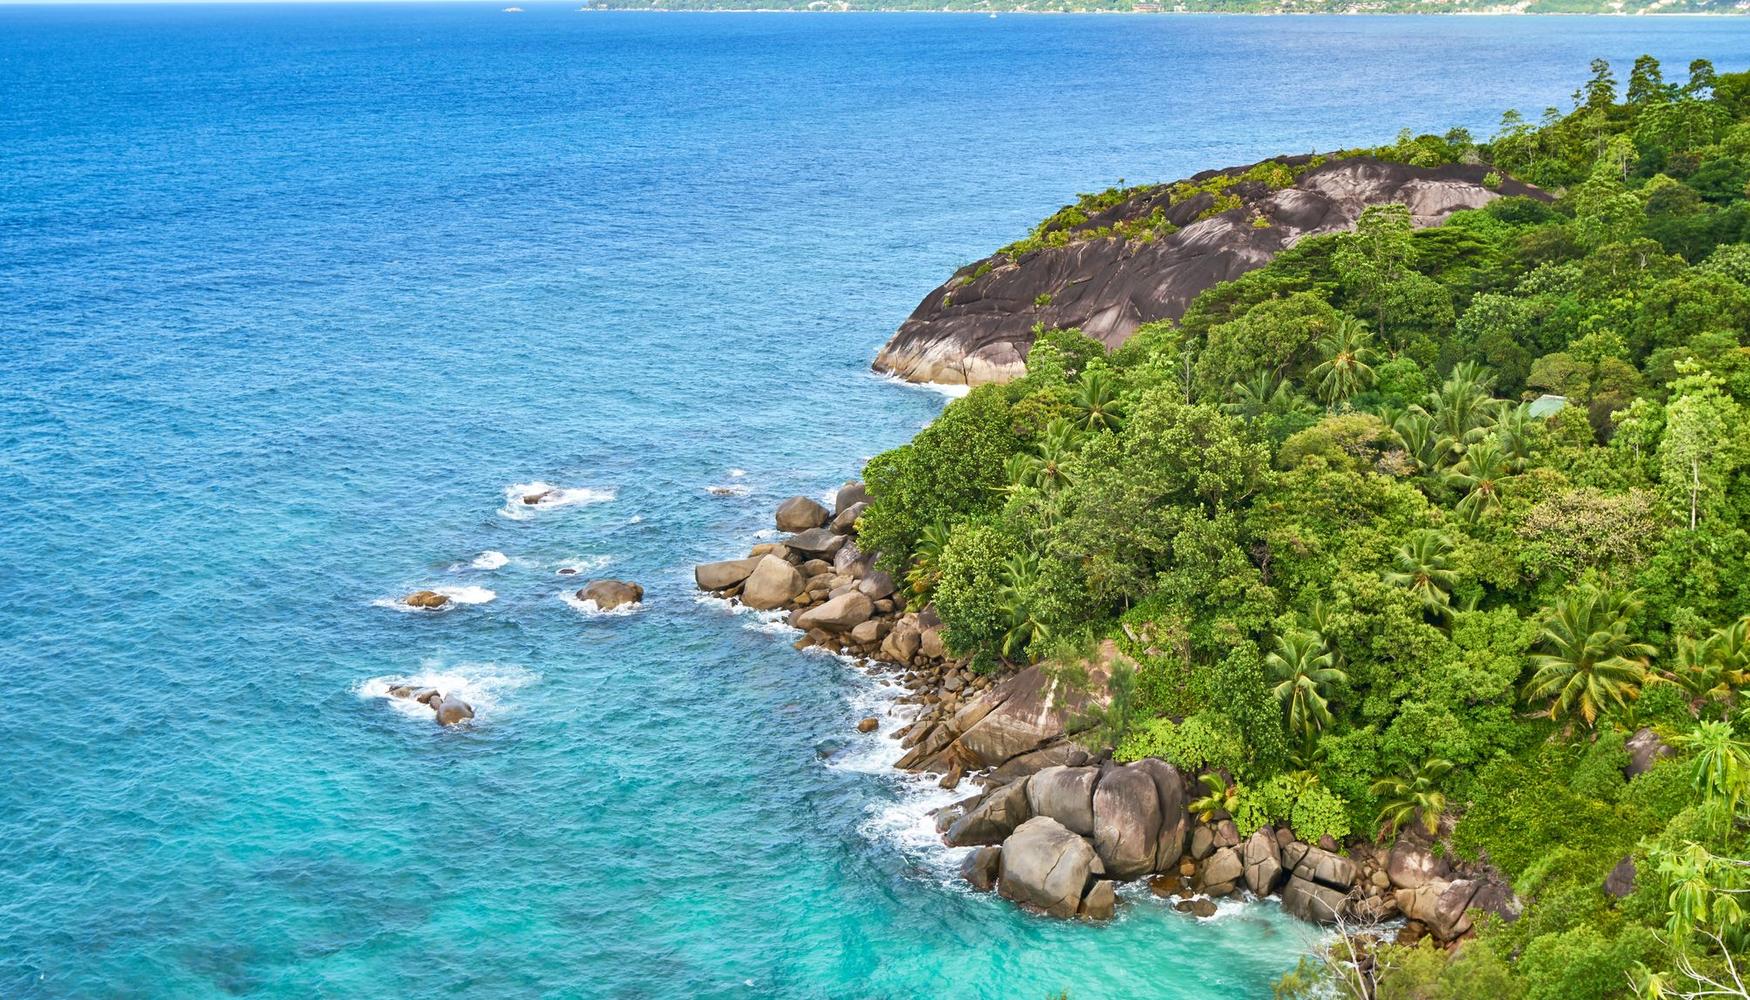 Seychelles Vacation Packages from $1,504 - Search Flight+Hotel on KAYAK